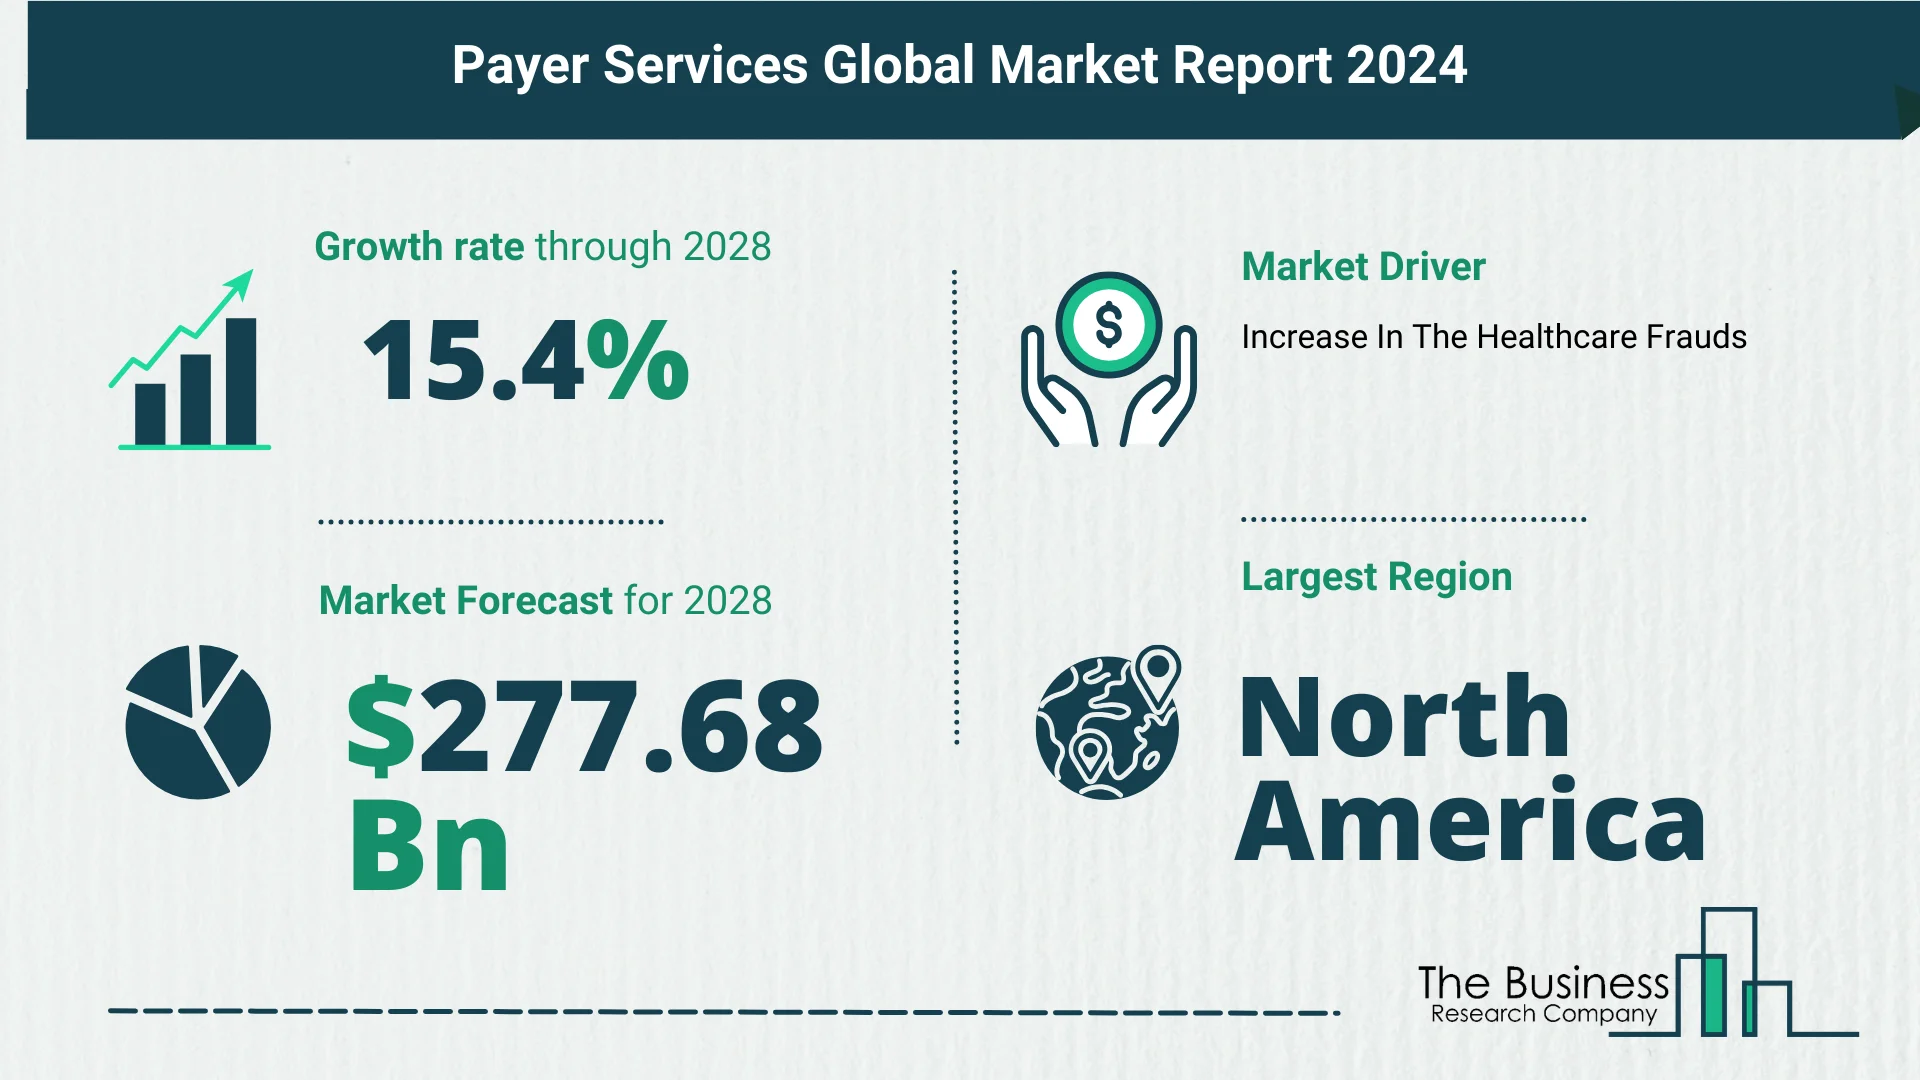 Global Payer Services Market Overview 2024: Size, Drivers, And Trends